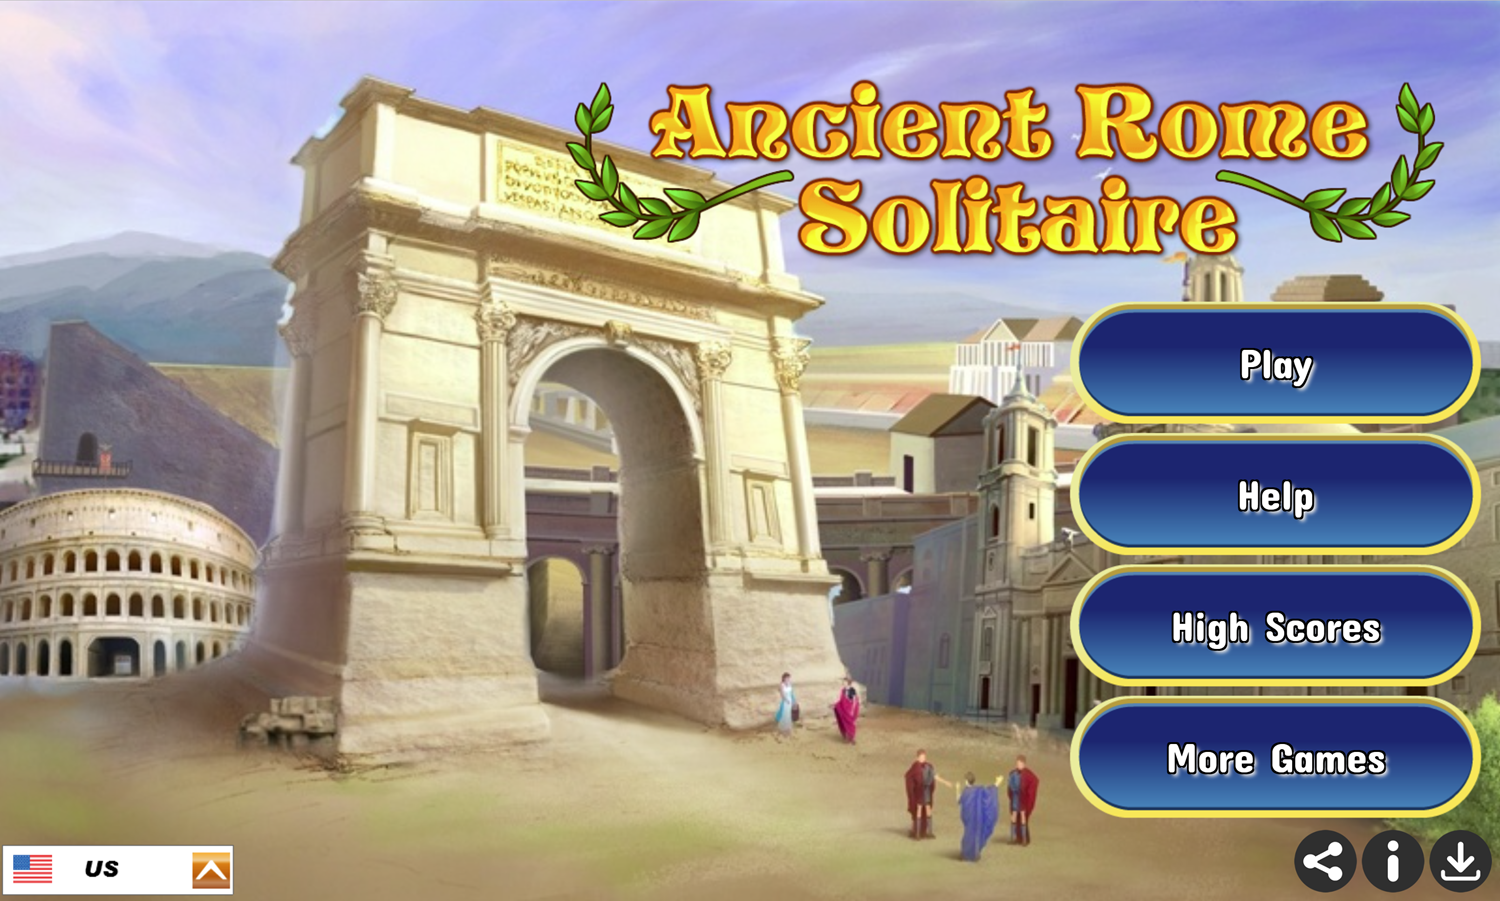 Ancient Rome Solitaire Game Welcome Screen Screenshot.